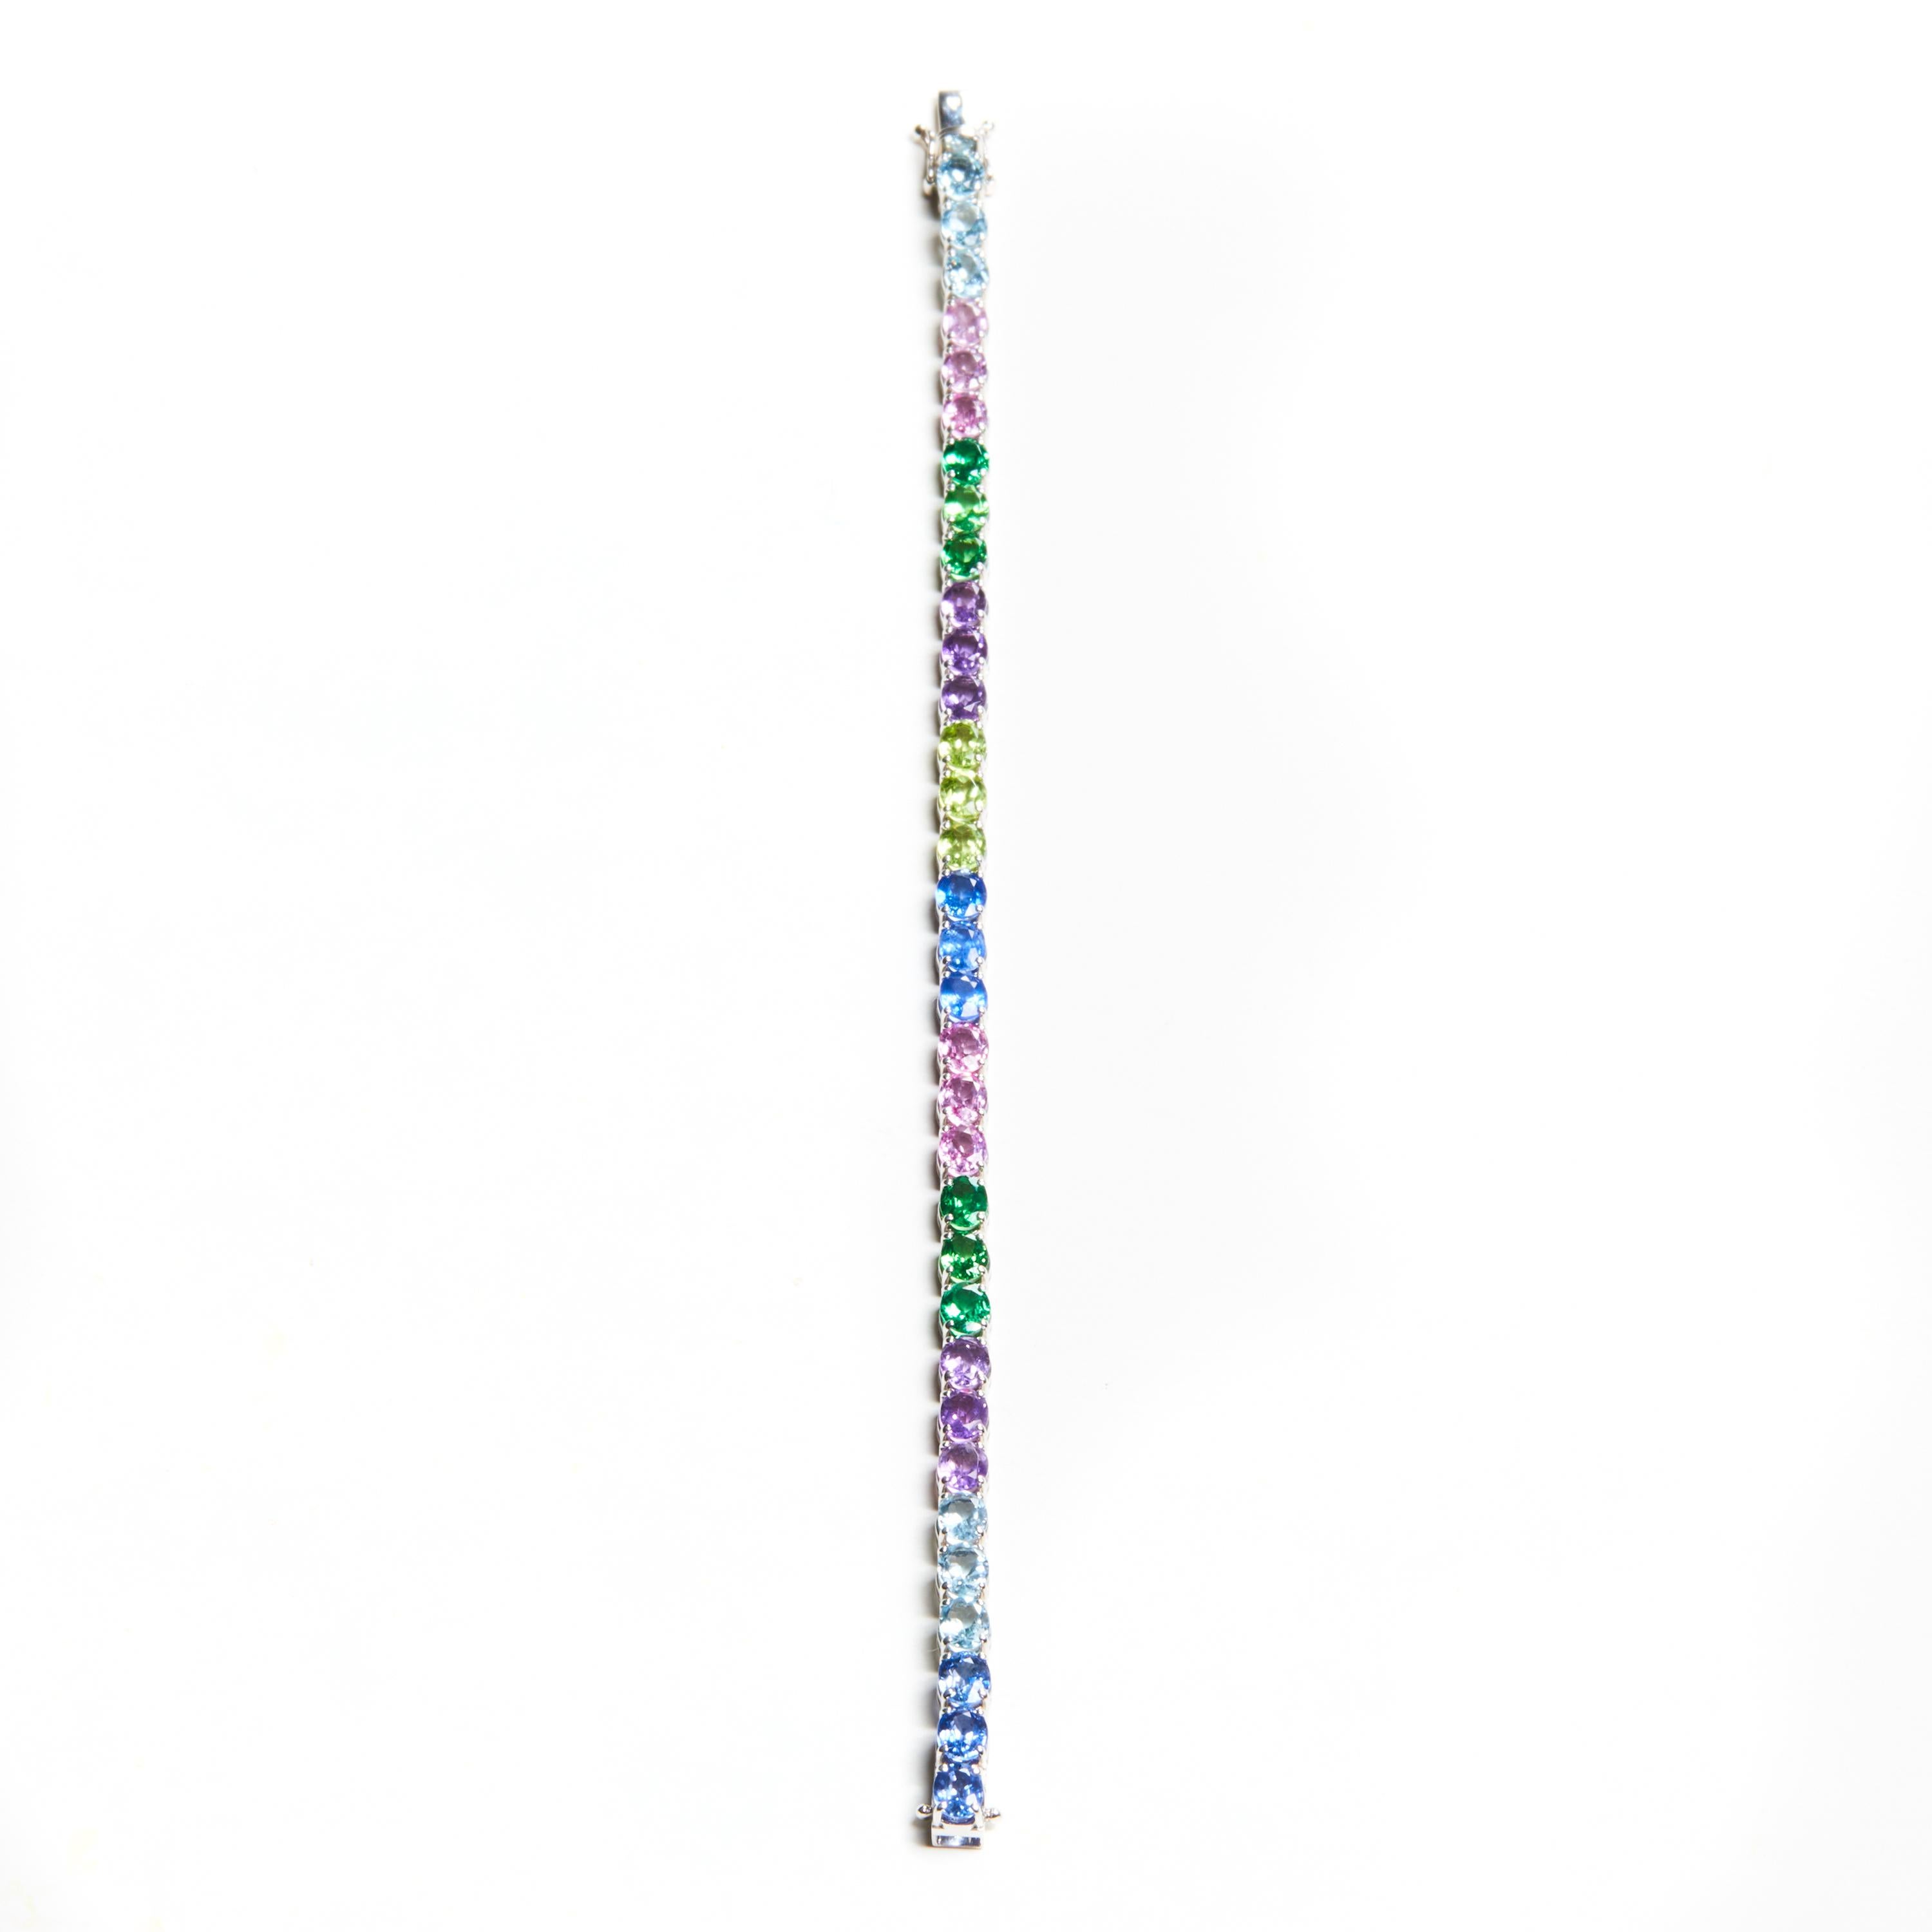 18 Karat White Gold and multi color stones Bracelet

6 Aquamarine 1.91 ct.
6 Saphire 3.31 ct.
6 Pink Saphire 2.37 ct
6 Peridot 2,46 ct.
6 Amethyst 1.84 ct.
6 Tsavorite 2.11 ct.



Founded in 1974, Gianni Lazzaro is a family-owned jewelry company